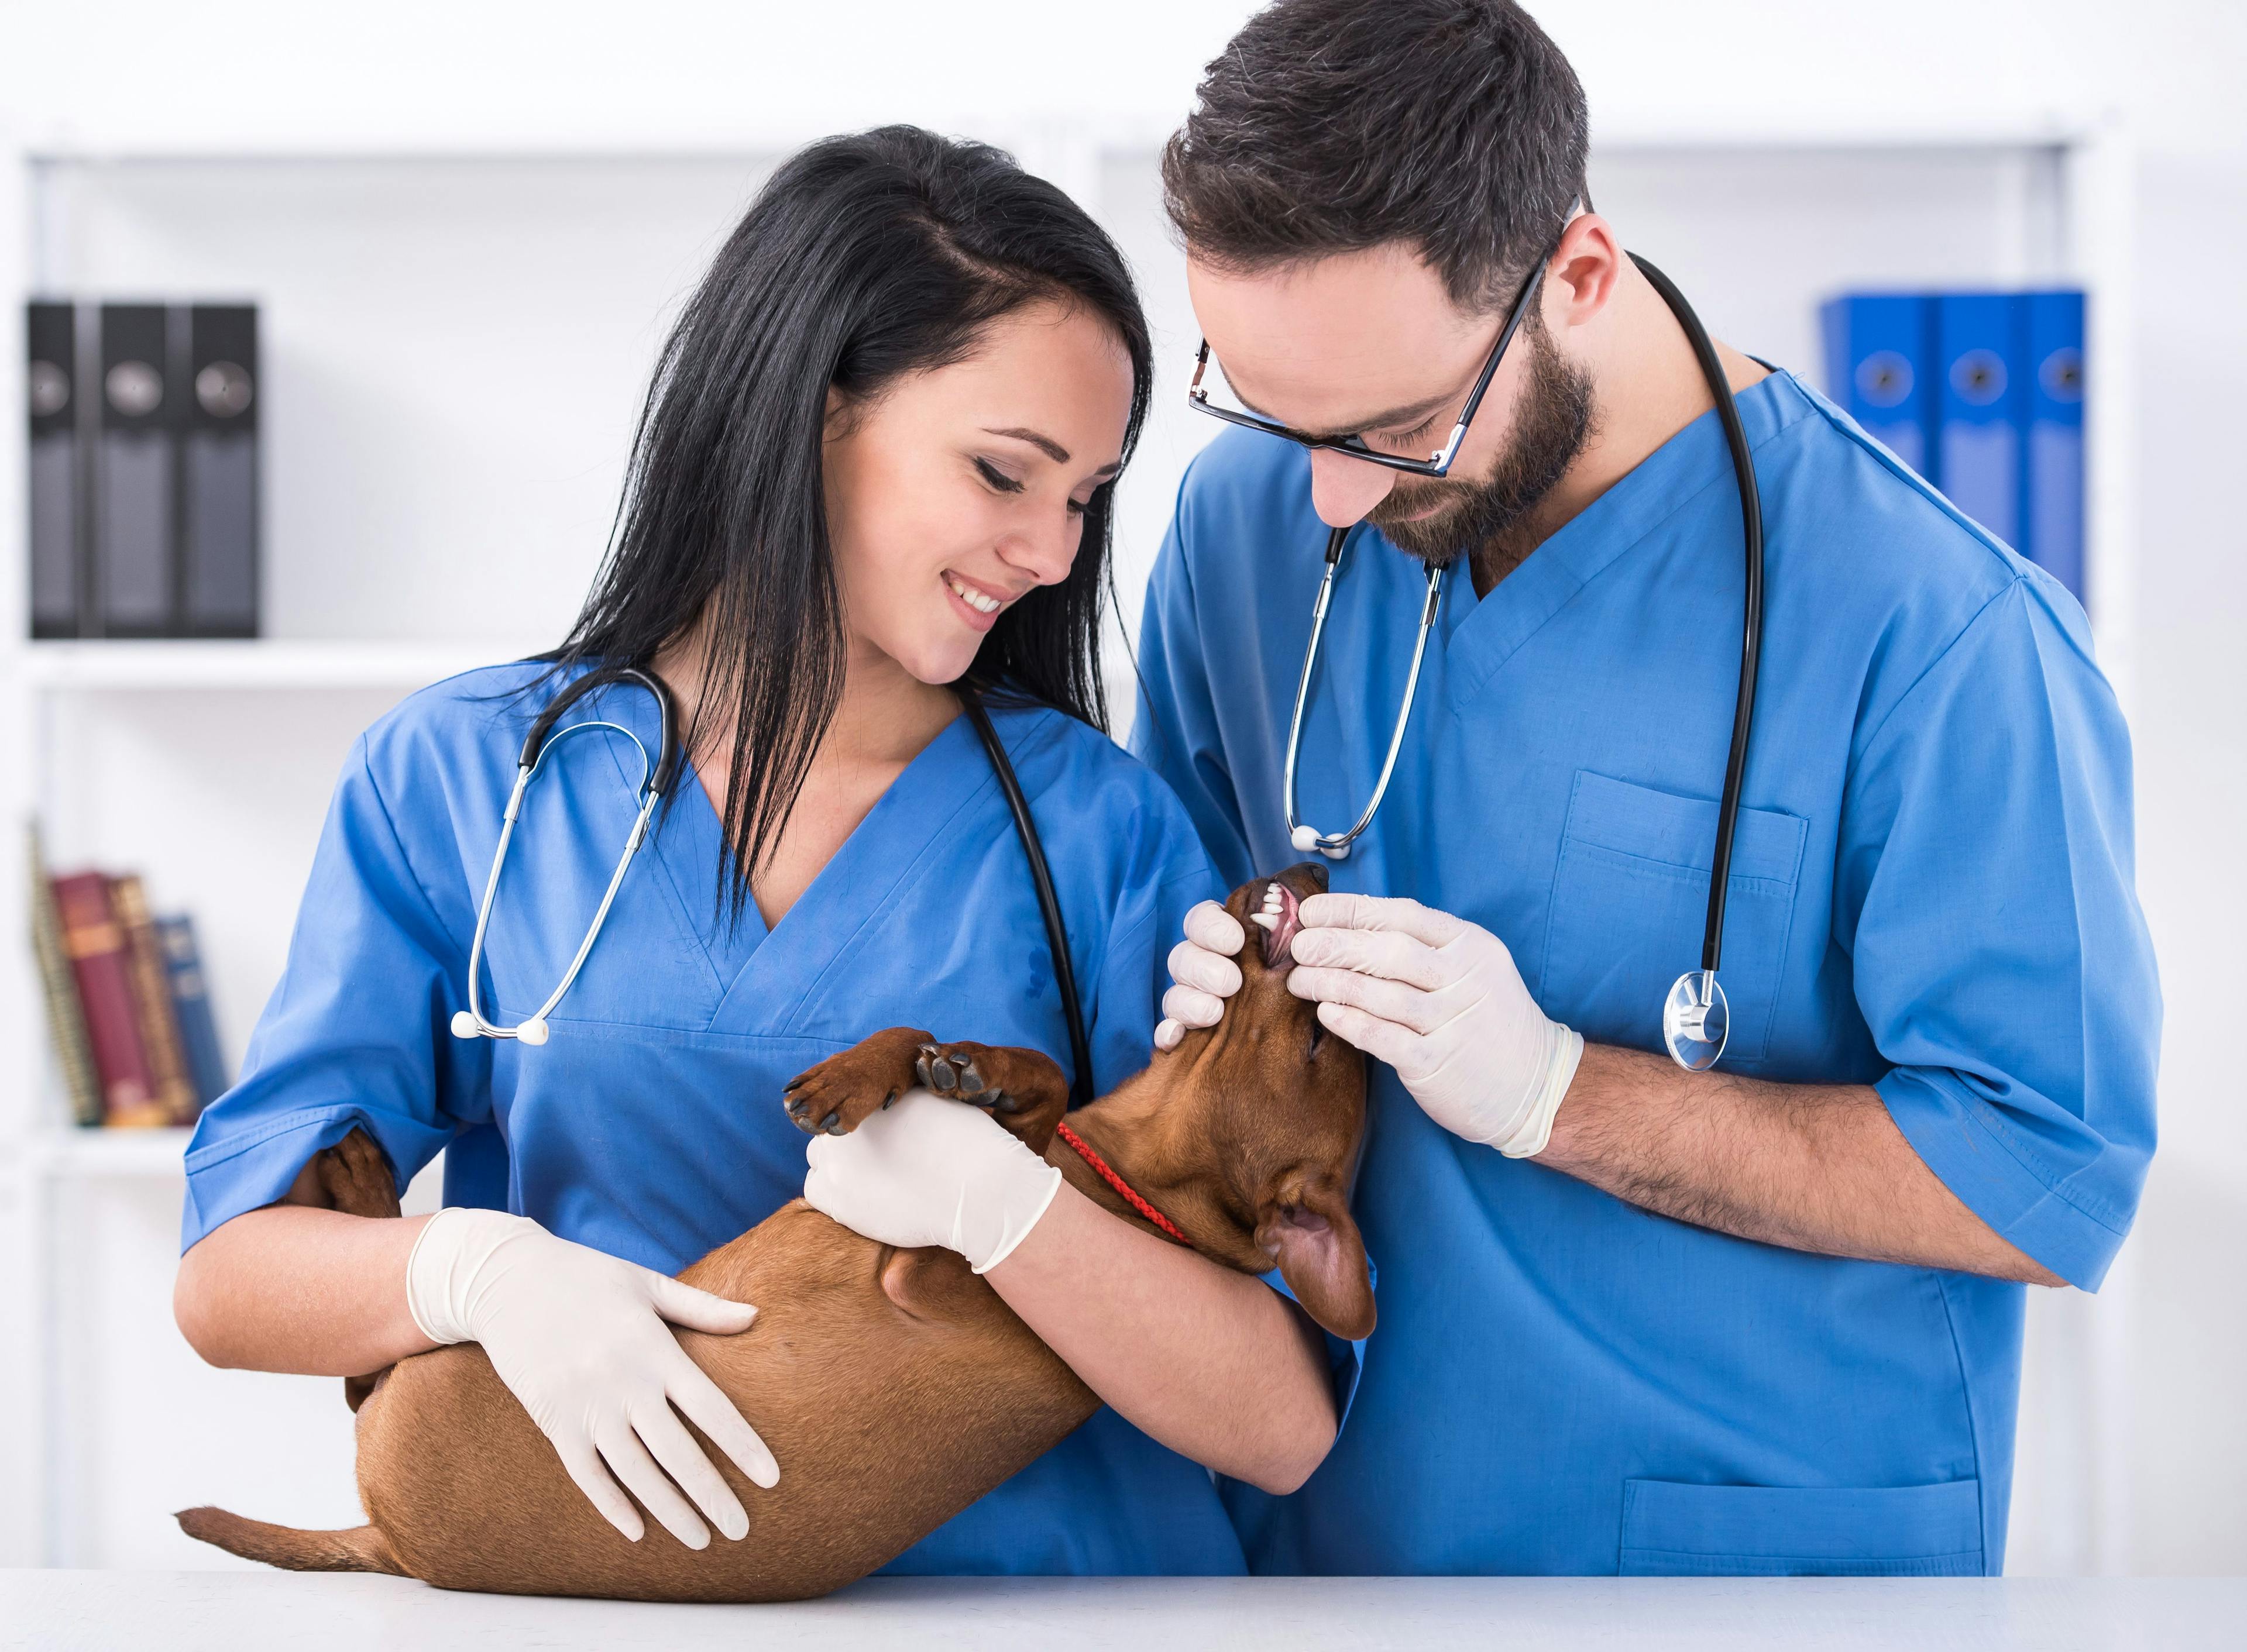 Veterinary technicians embrace their roles